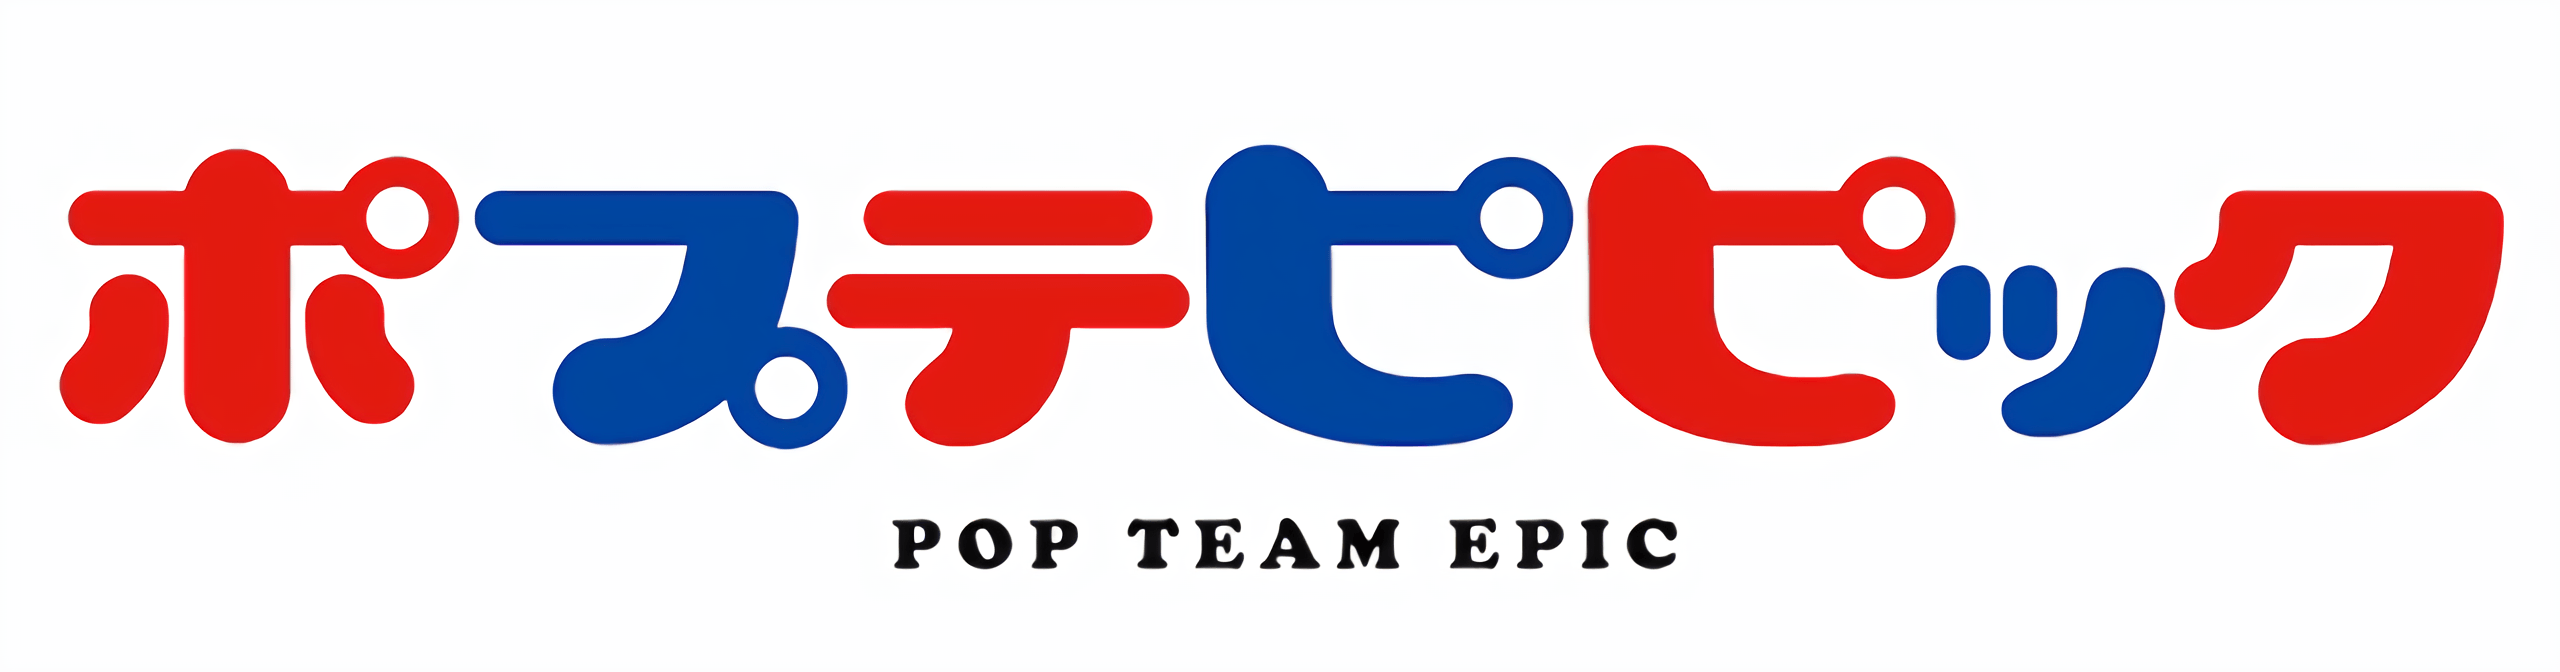 Team Epic Logo - File:Pop team epic.logo.png - Wikimedia Commons